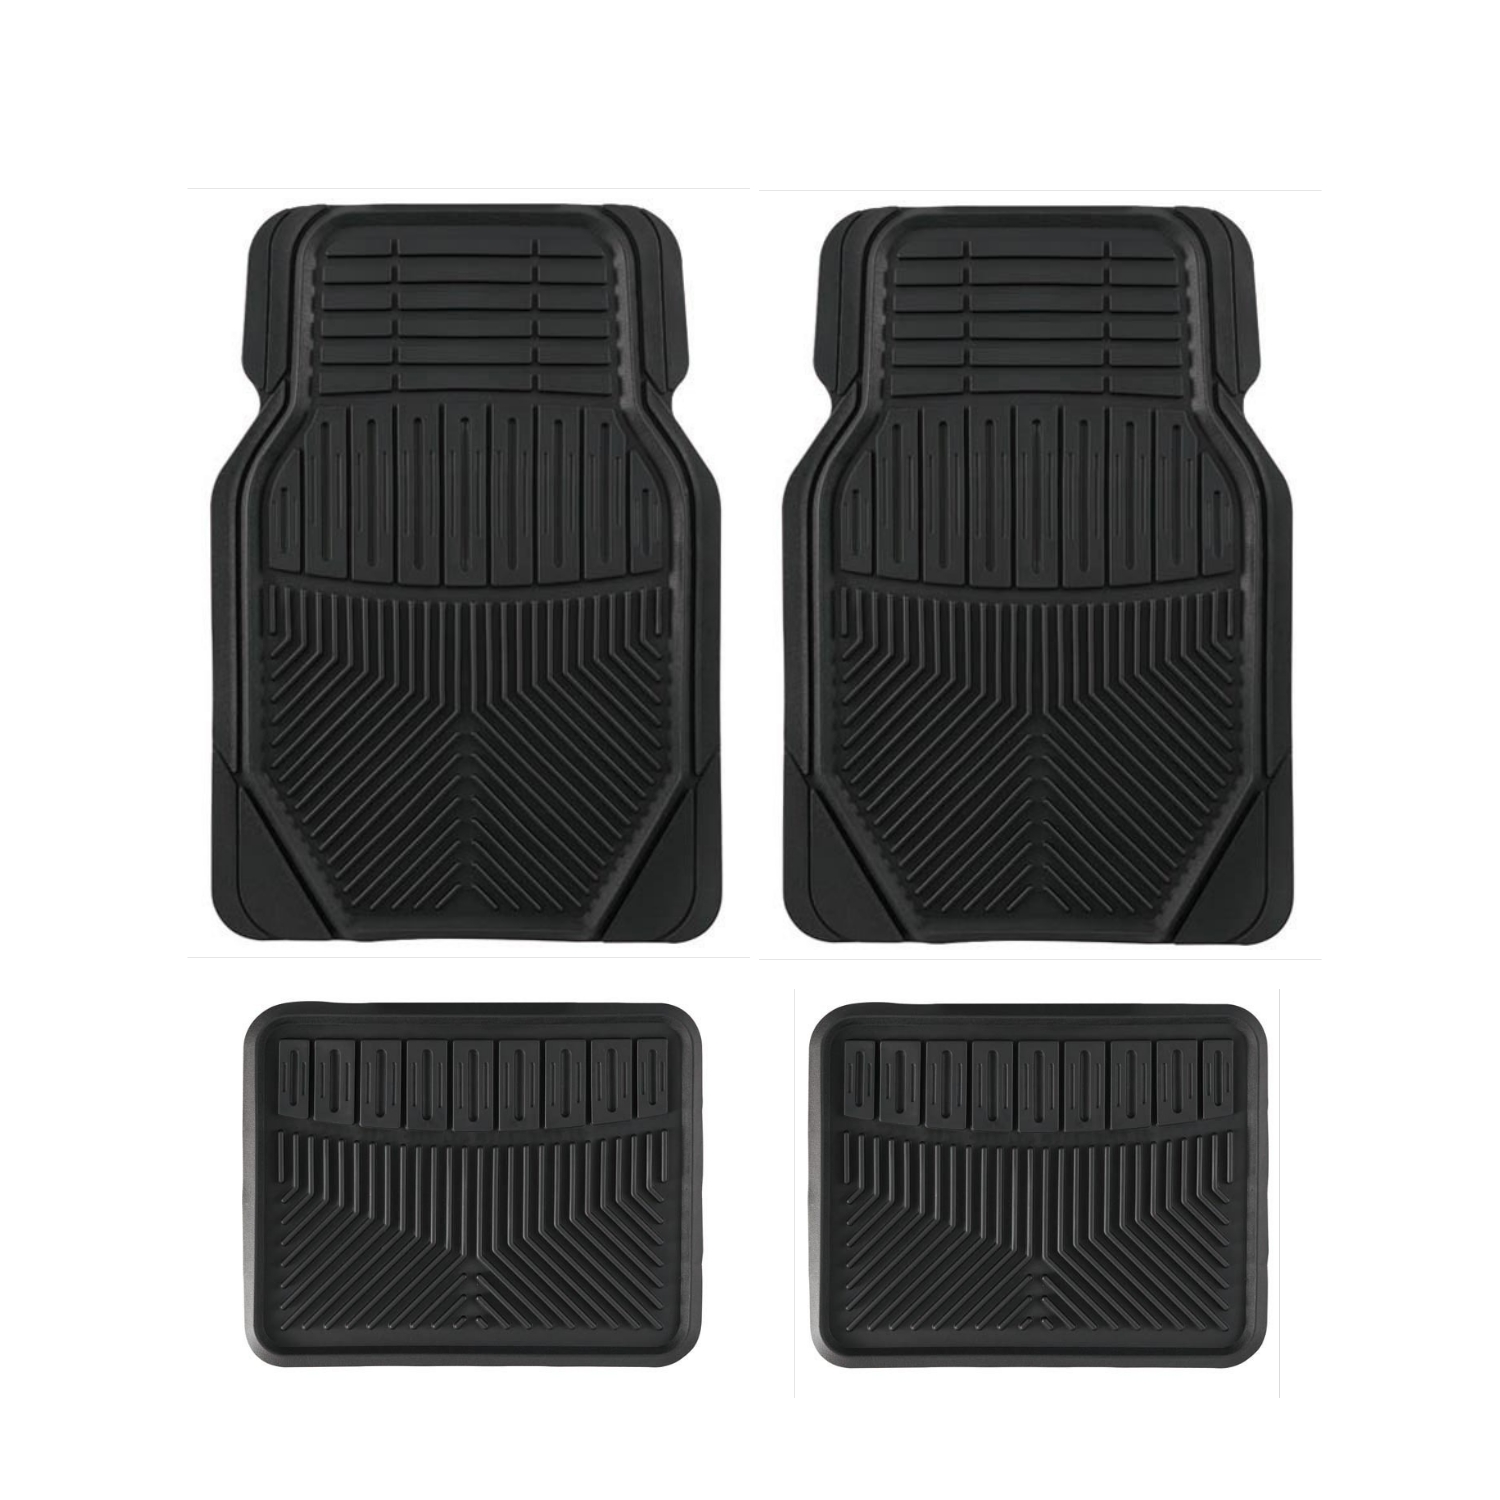 All-Weather Floor Mats with Drainage Channels for Car, Truck, Van & SUV - Waterproof Front & Rear Liners 6801